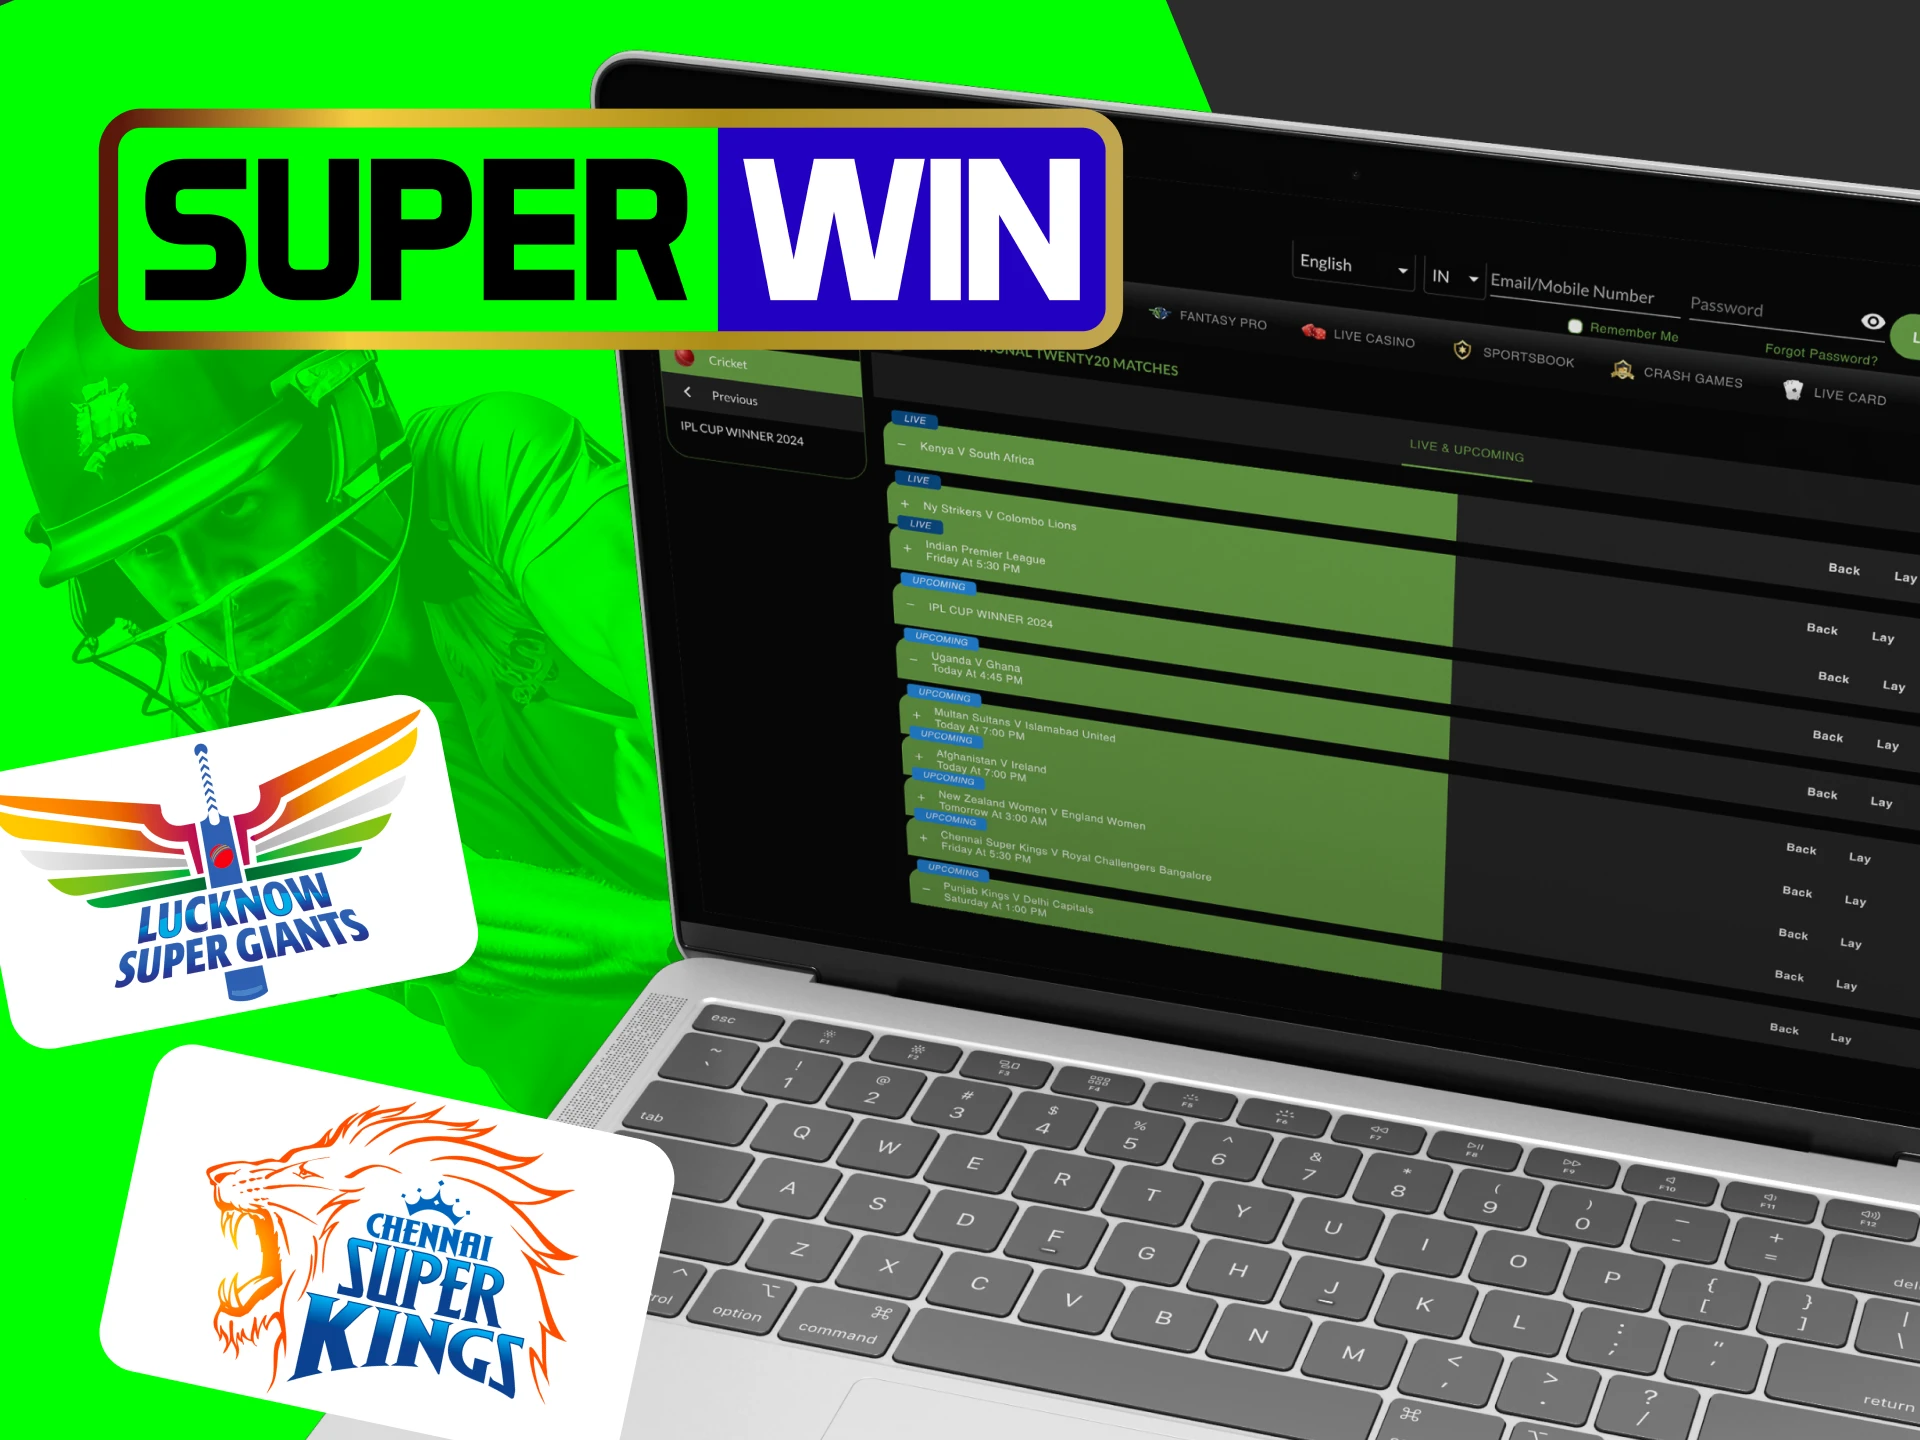 Which teams can I bet on in the IPL at SuperWin online casino.